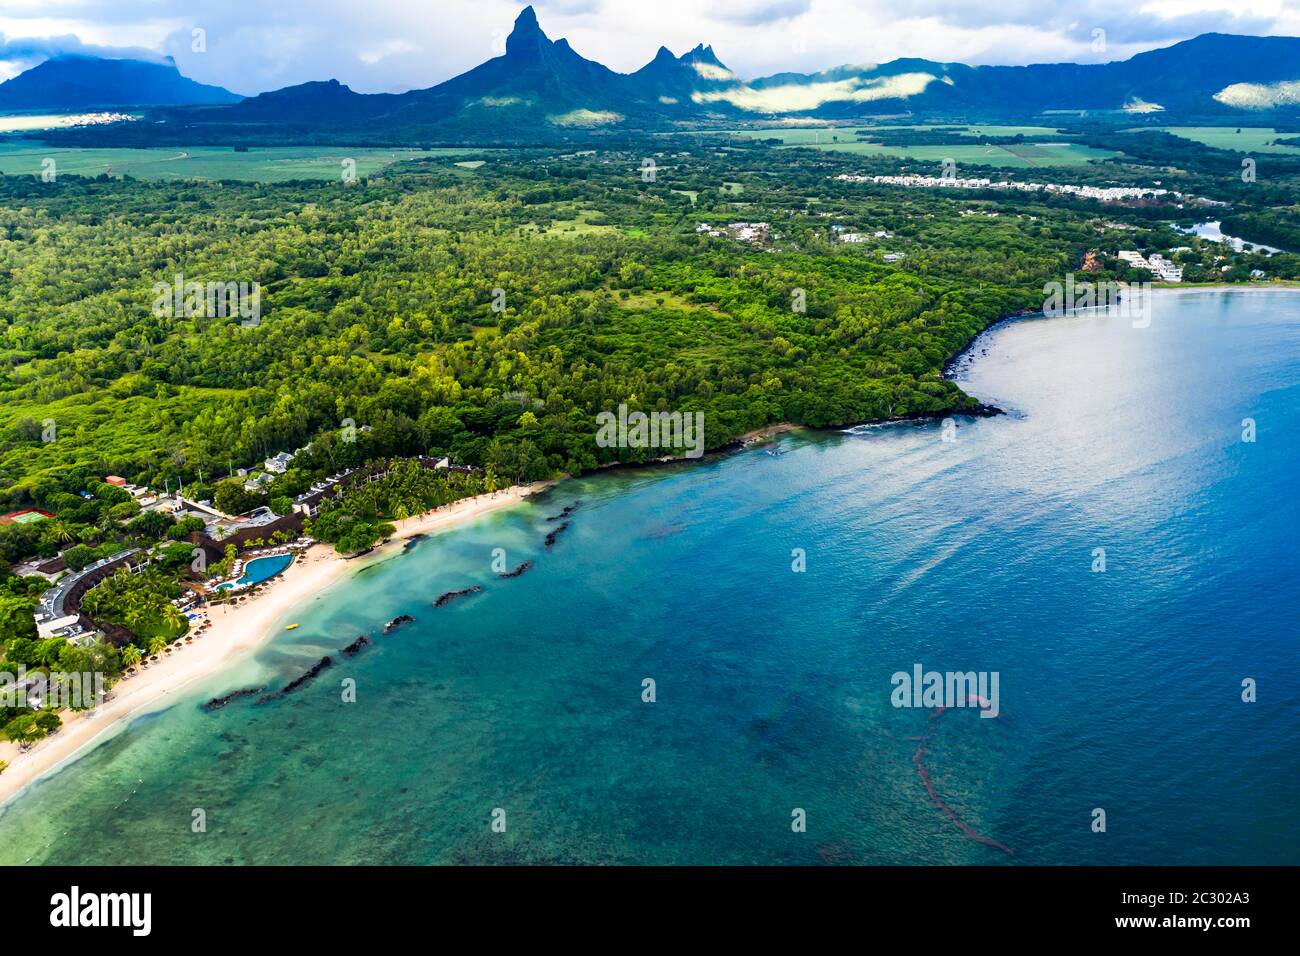 Aerial view, the beach of Flic en Flac with luxury hotels and palm trees, in the back the mountain Trois Mamelles, Mauritius, Africa Stock Photo